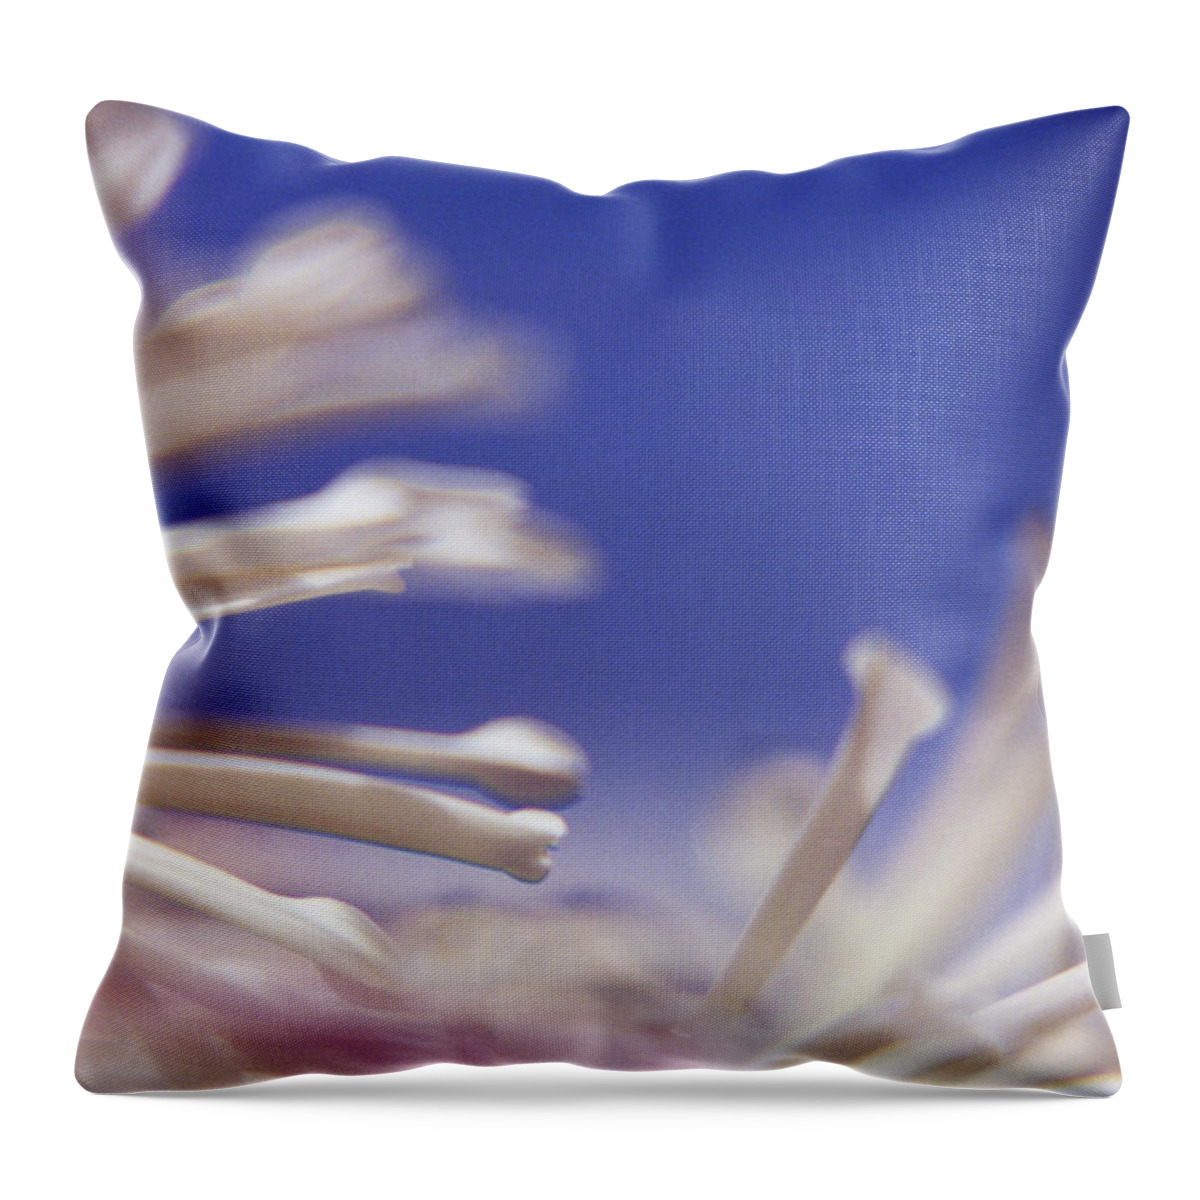 Macro Throw Pillow featuring the photograph Macro Flower 2 by Lee Santa